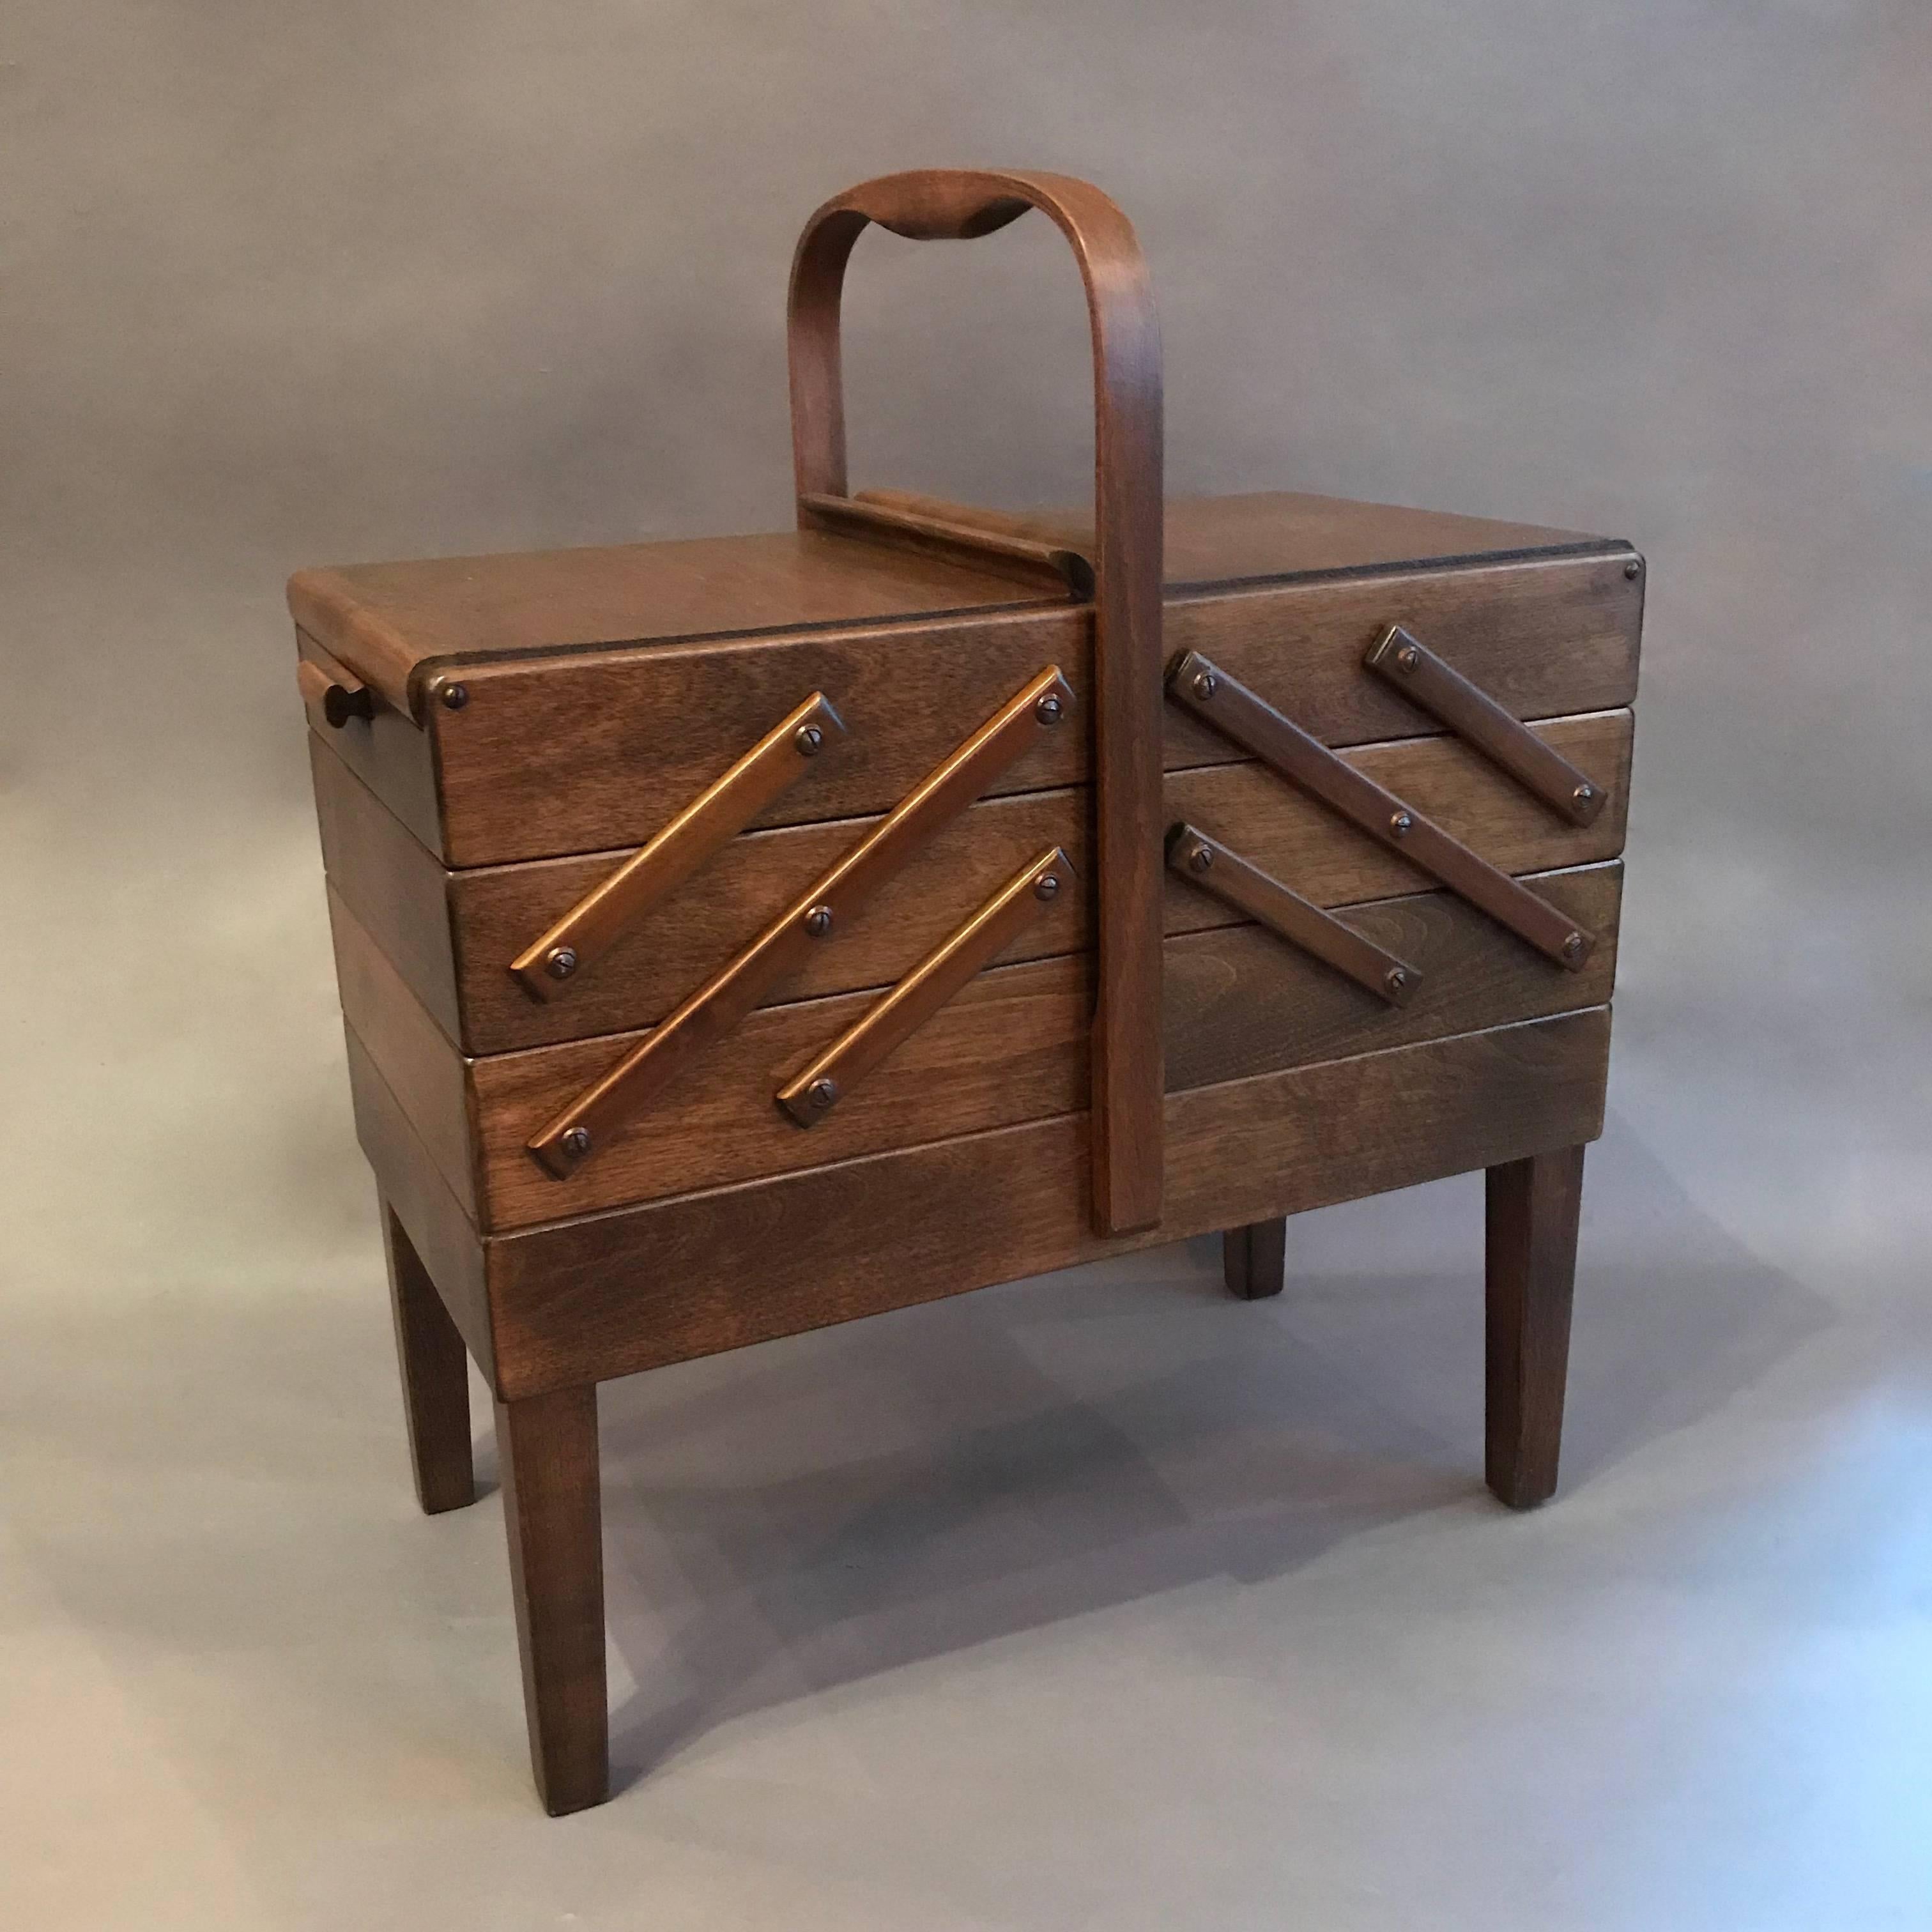 Scandinavian Modern, teak sewing basket features accordion expansion on either side with graduated trays from 21 - 67 in.